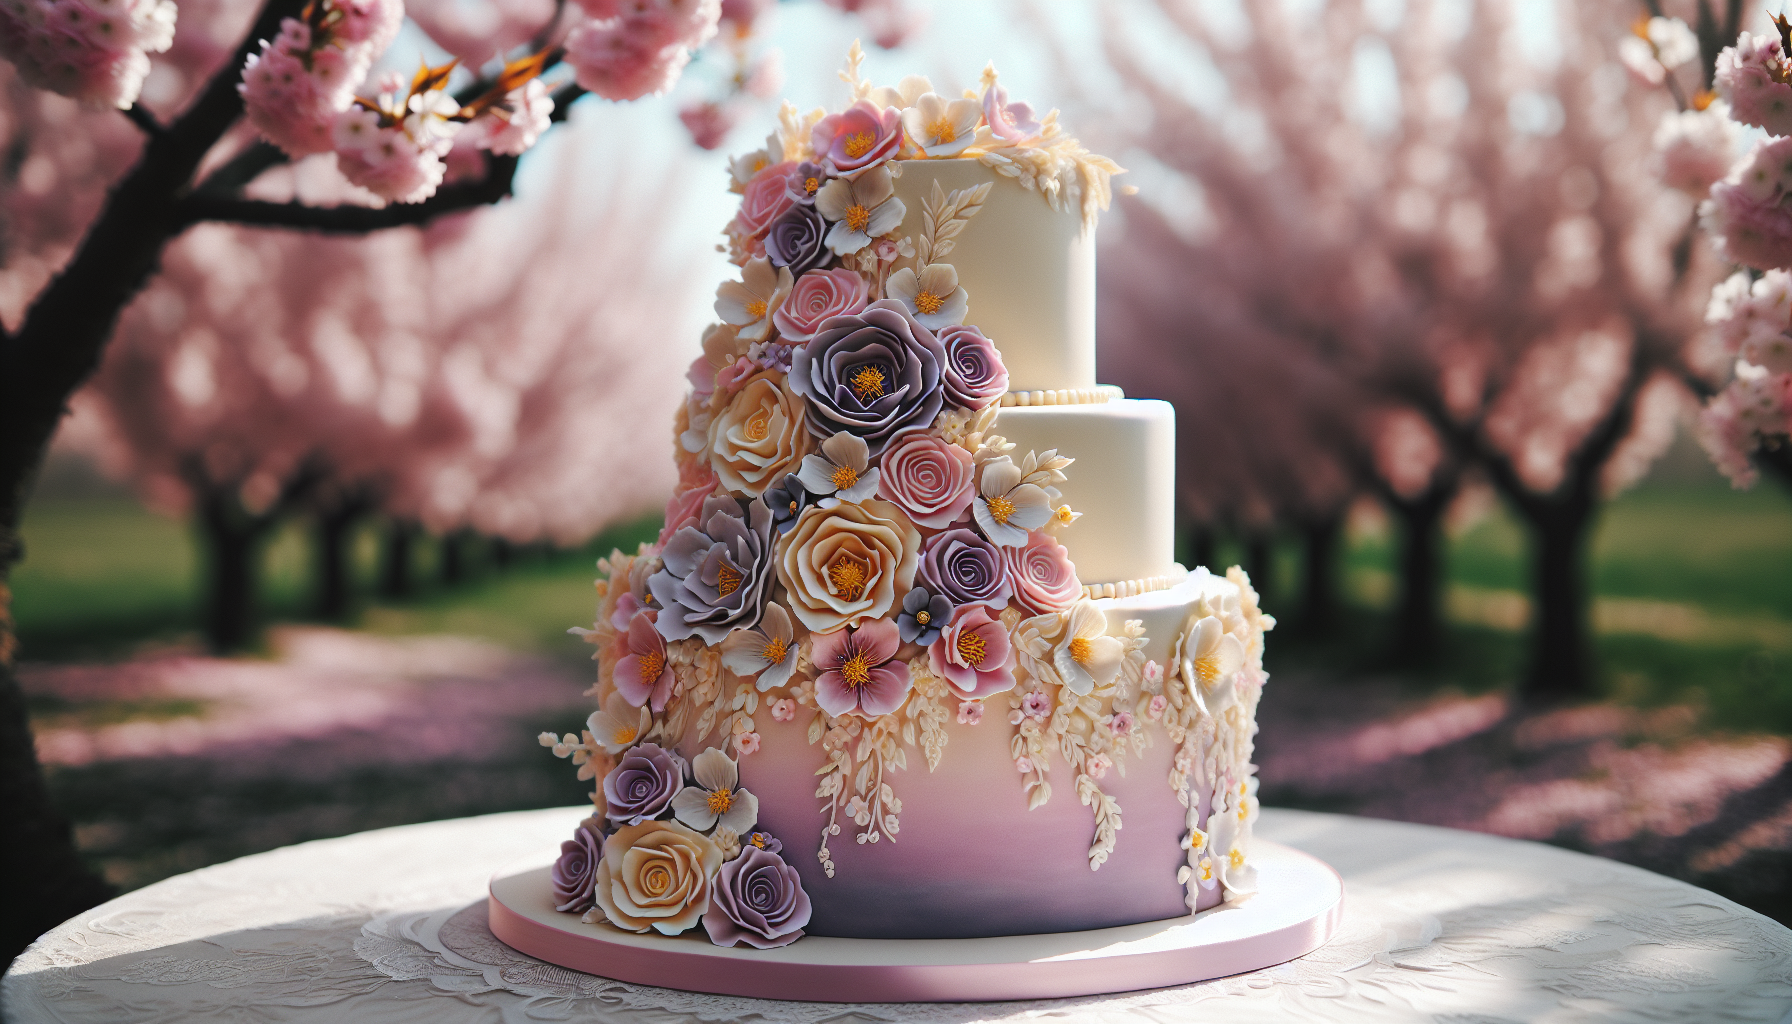 A close-up photograph of a three-tiered wedding cake adorned with intricate